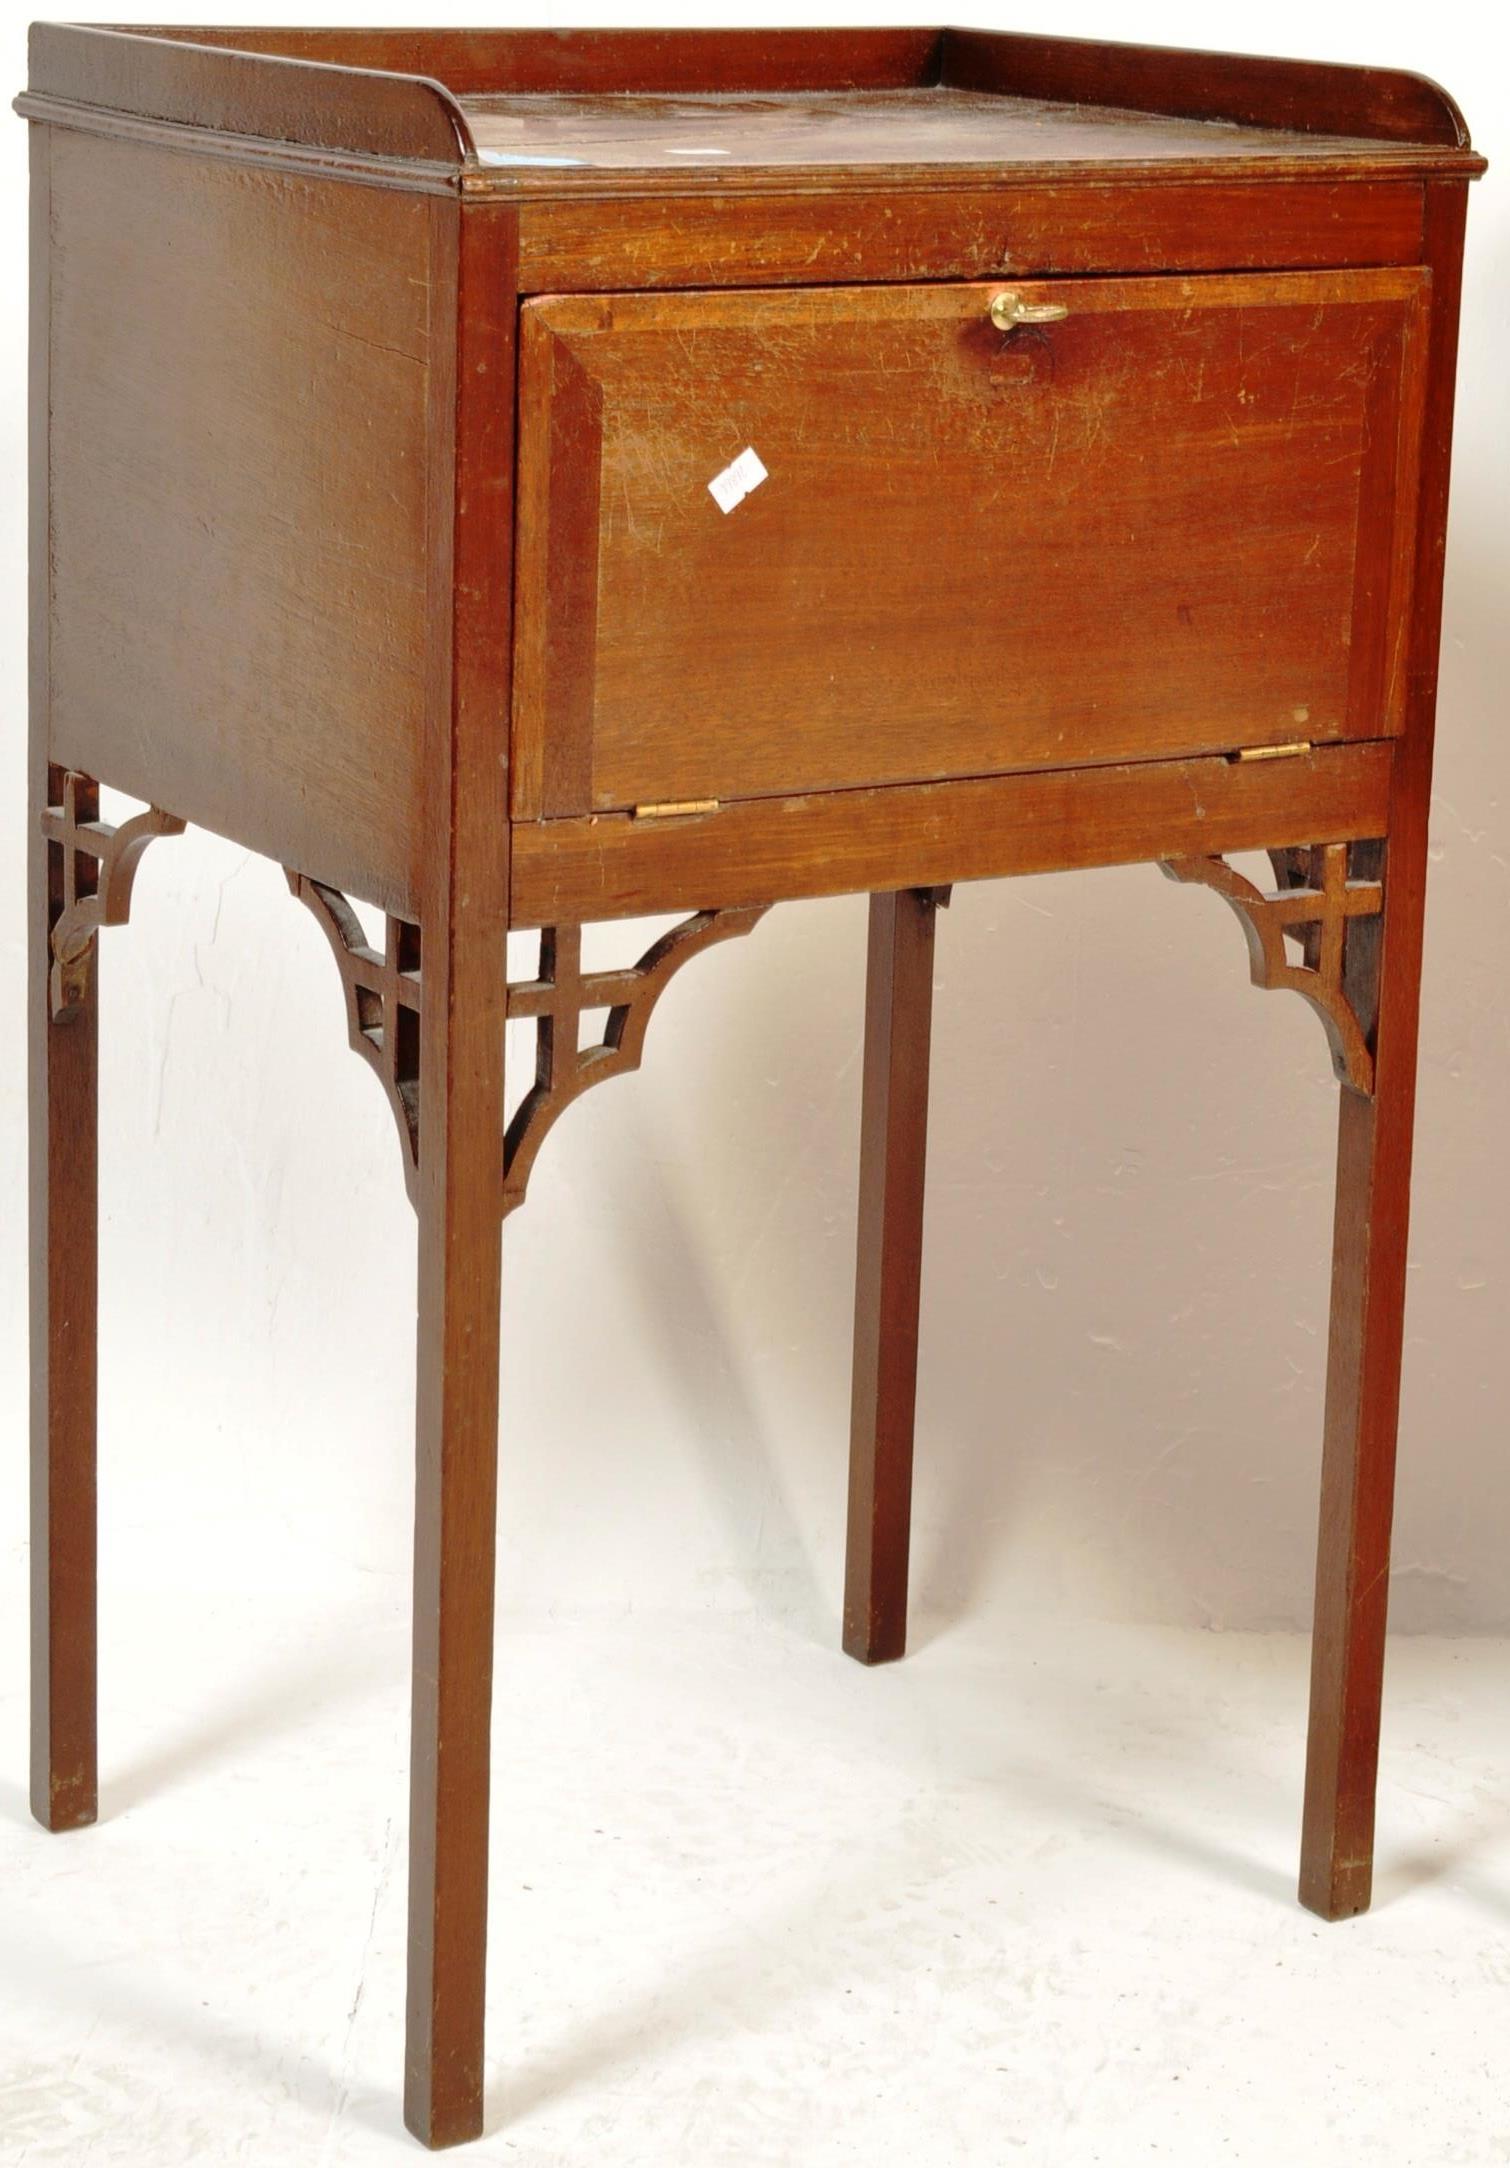 EDWARDIAN MAHOGANY DRESSING TABLE CHEST AND WASHSTAND - Image 2 of 9